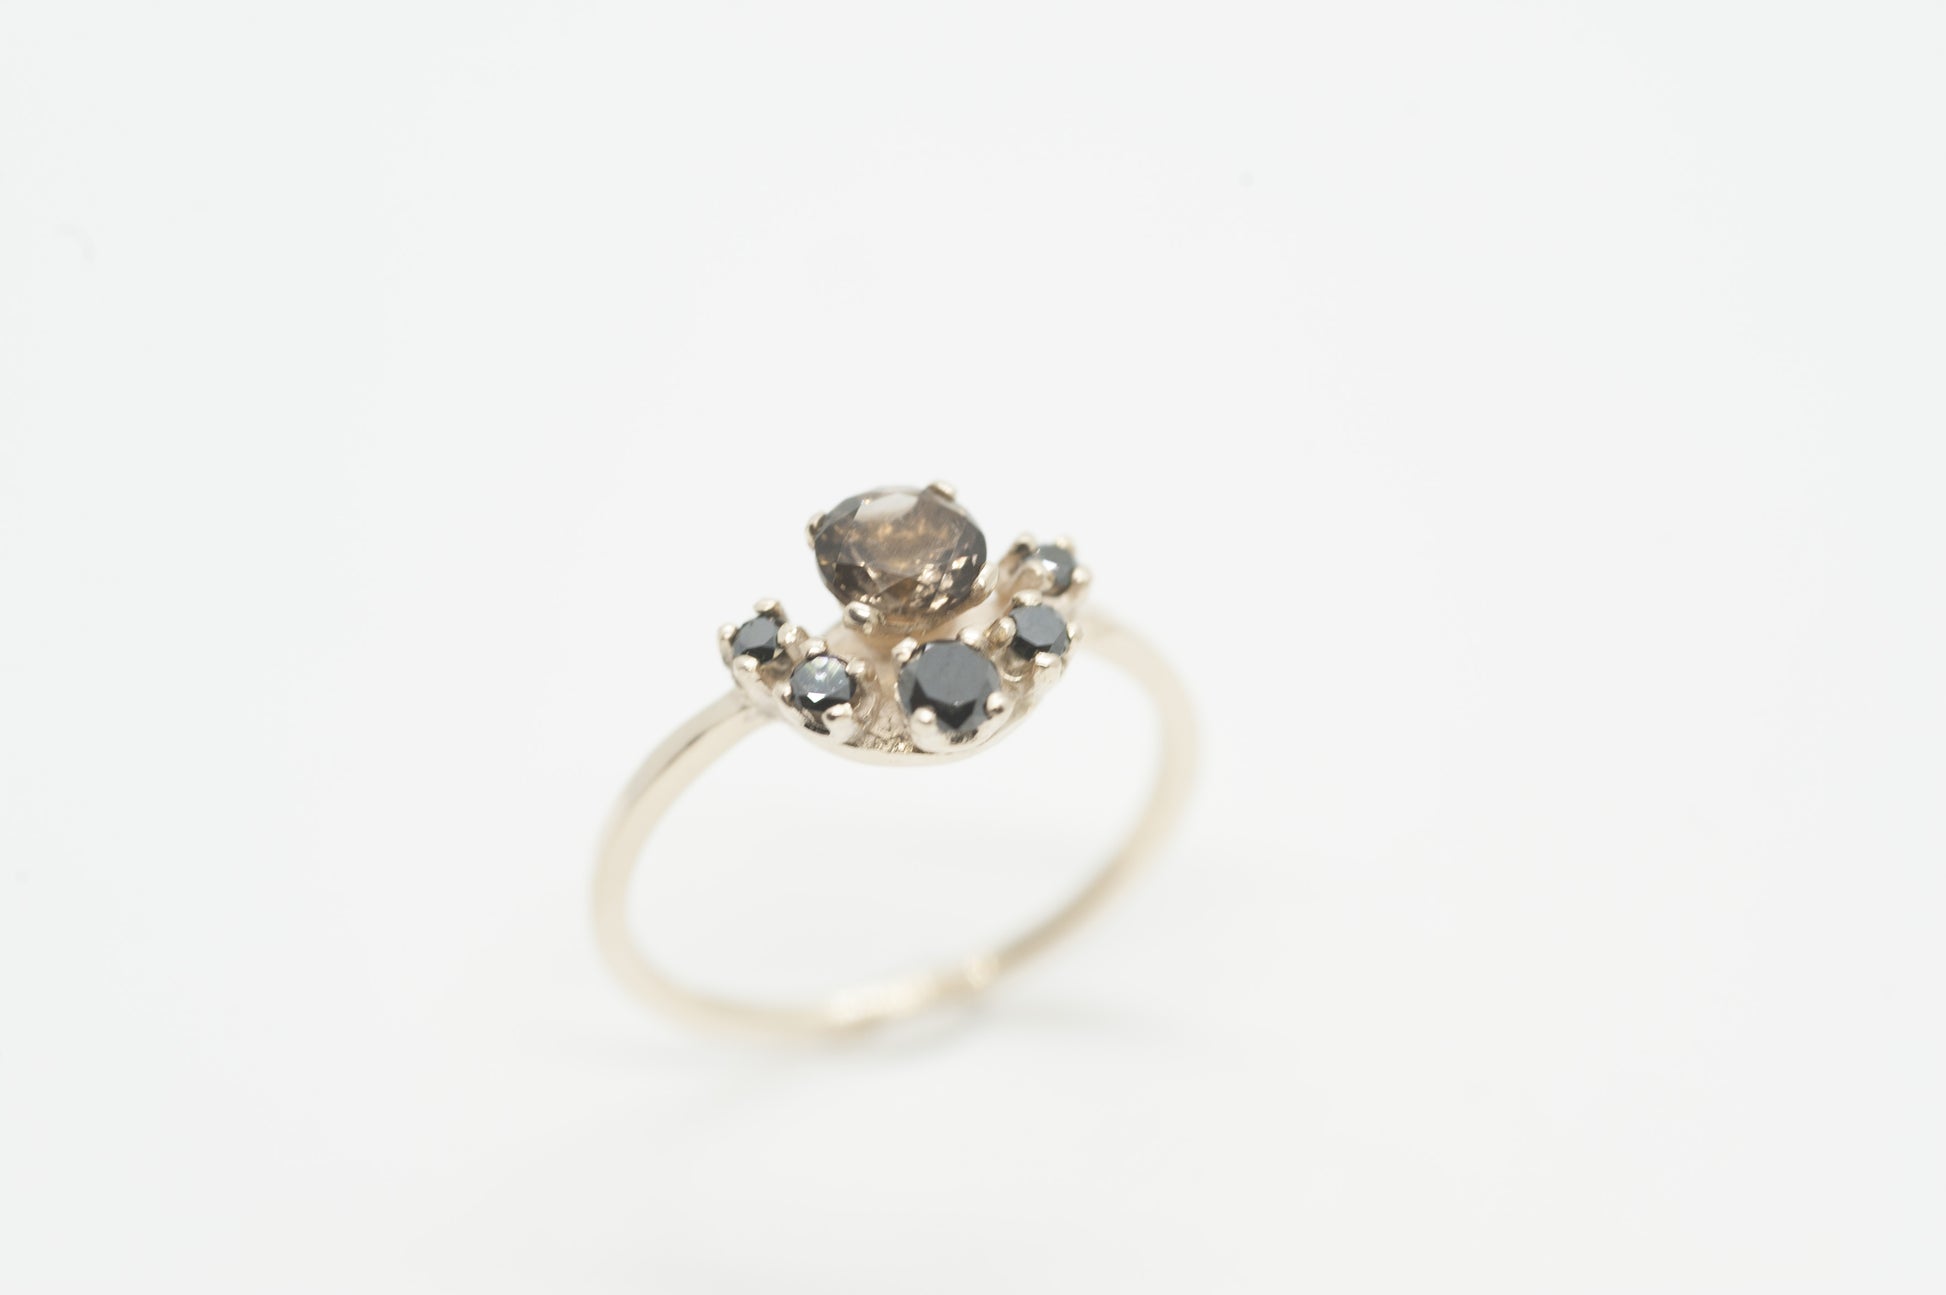 Elegant custom gold ring with smokey quartz centerpiece and black diamonds displayed on a clean white surface